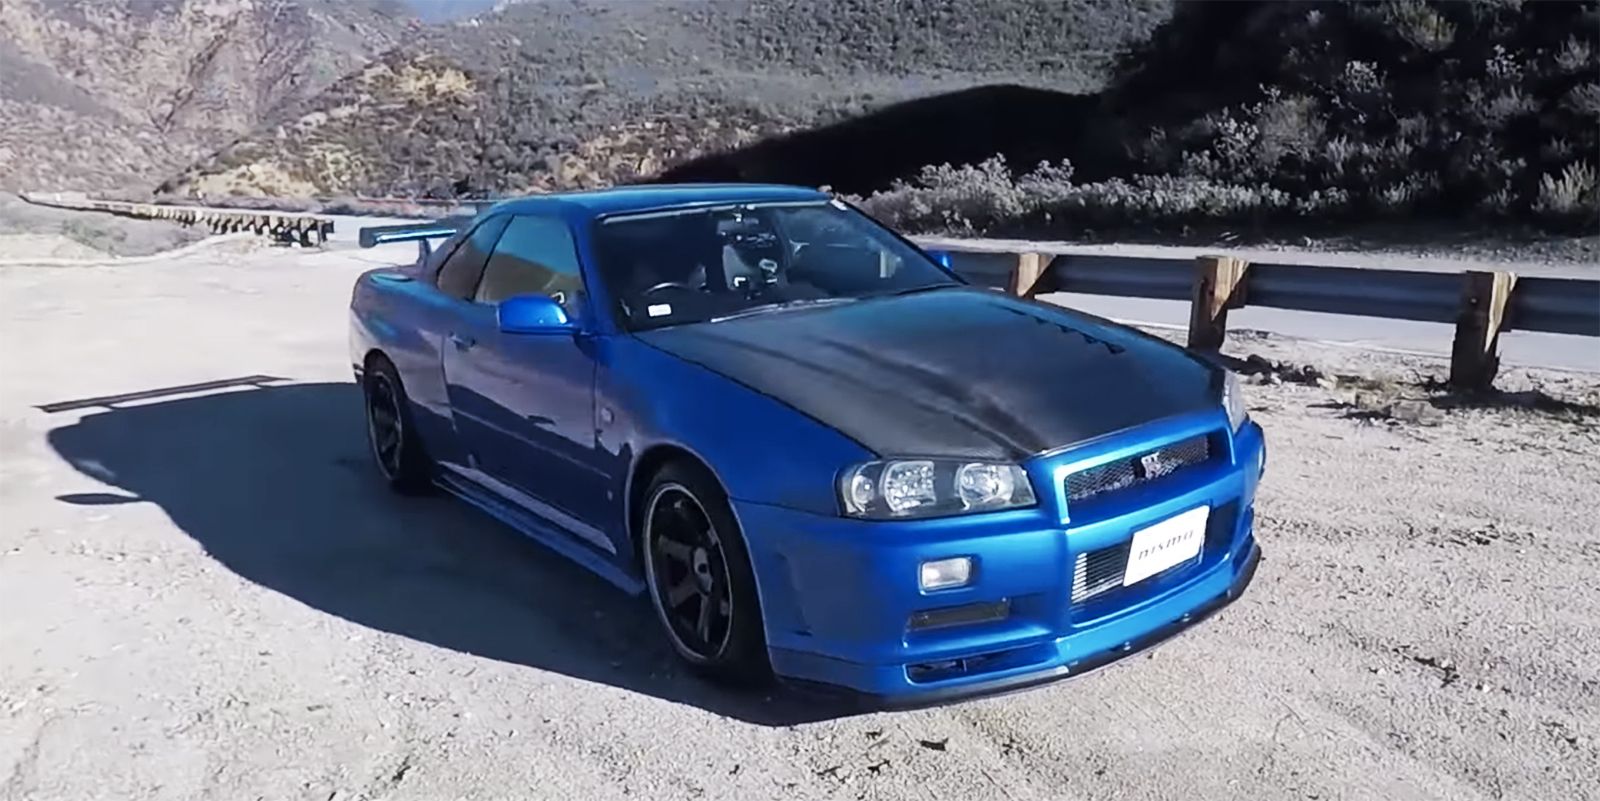 The R34 Skyline Gt R More Than Lives Up To The Hype